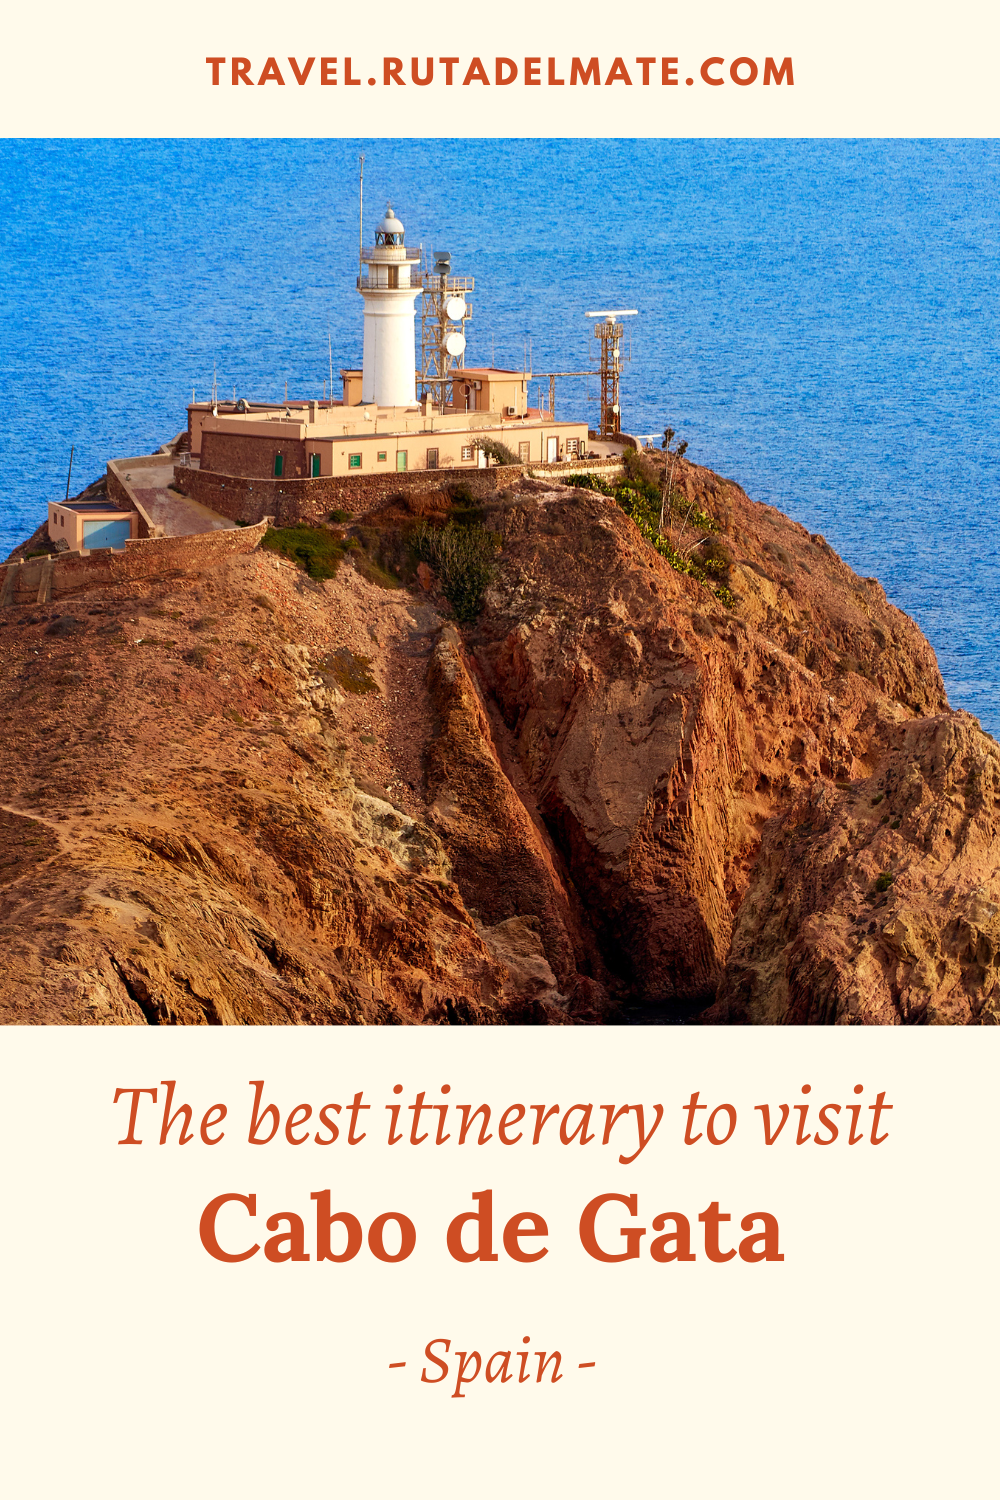 Things to do in Cabo de Gata, the best itinerary